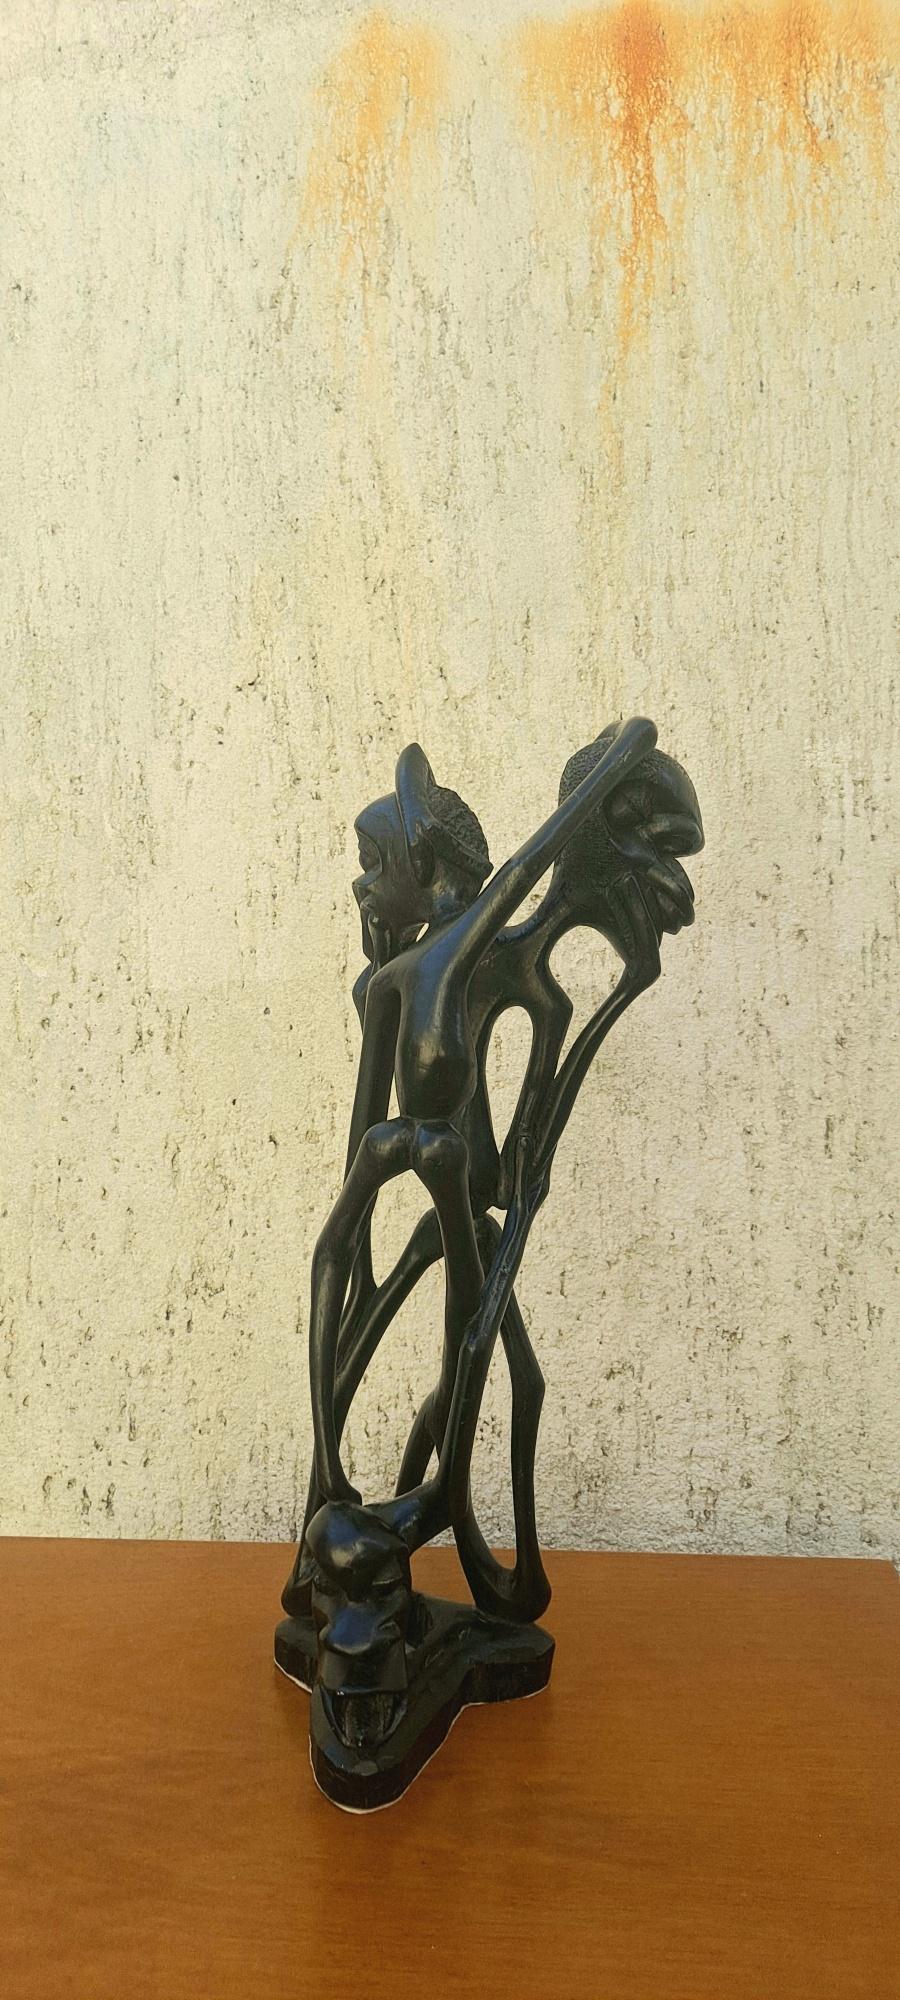 Abstract sculpture in Ebony wood by the student at Accademia di Belle Arte Venezia.